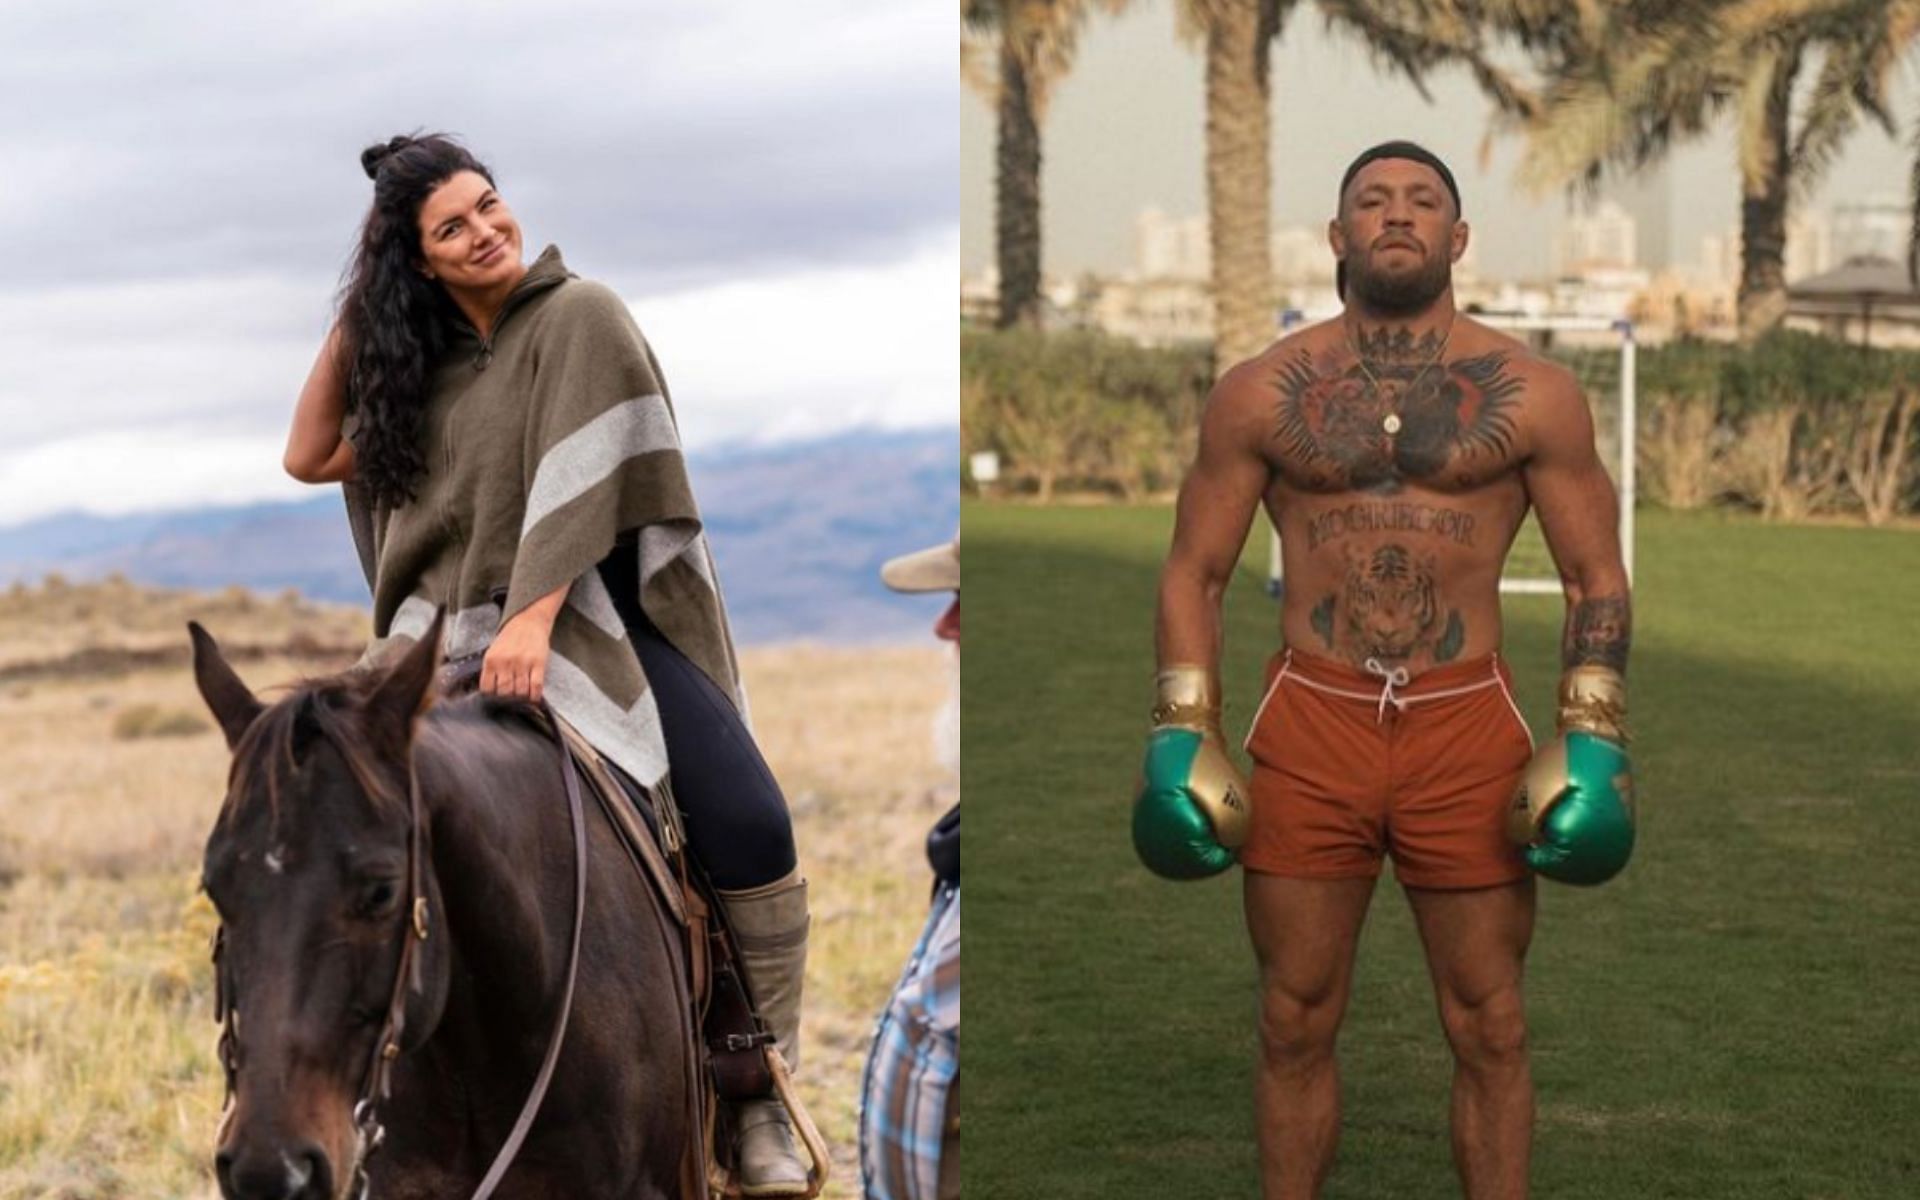 Gina Carano (left), Conor McGregor (right) [Images courtesy of @ginajcarano and @thenotoriousmma on Instagram]